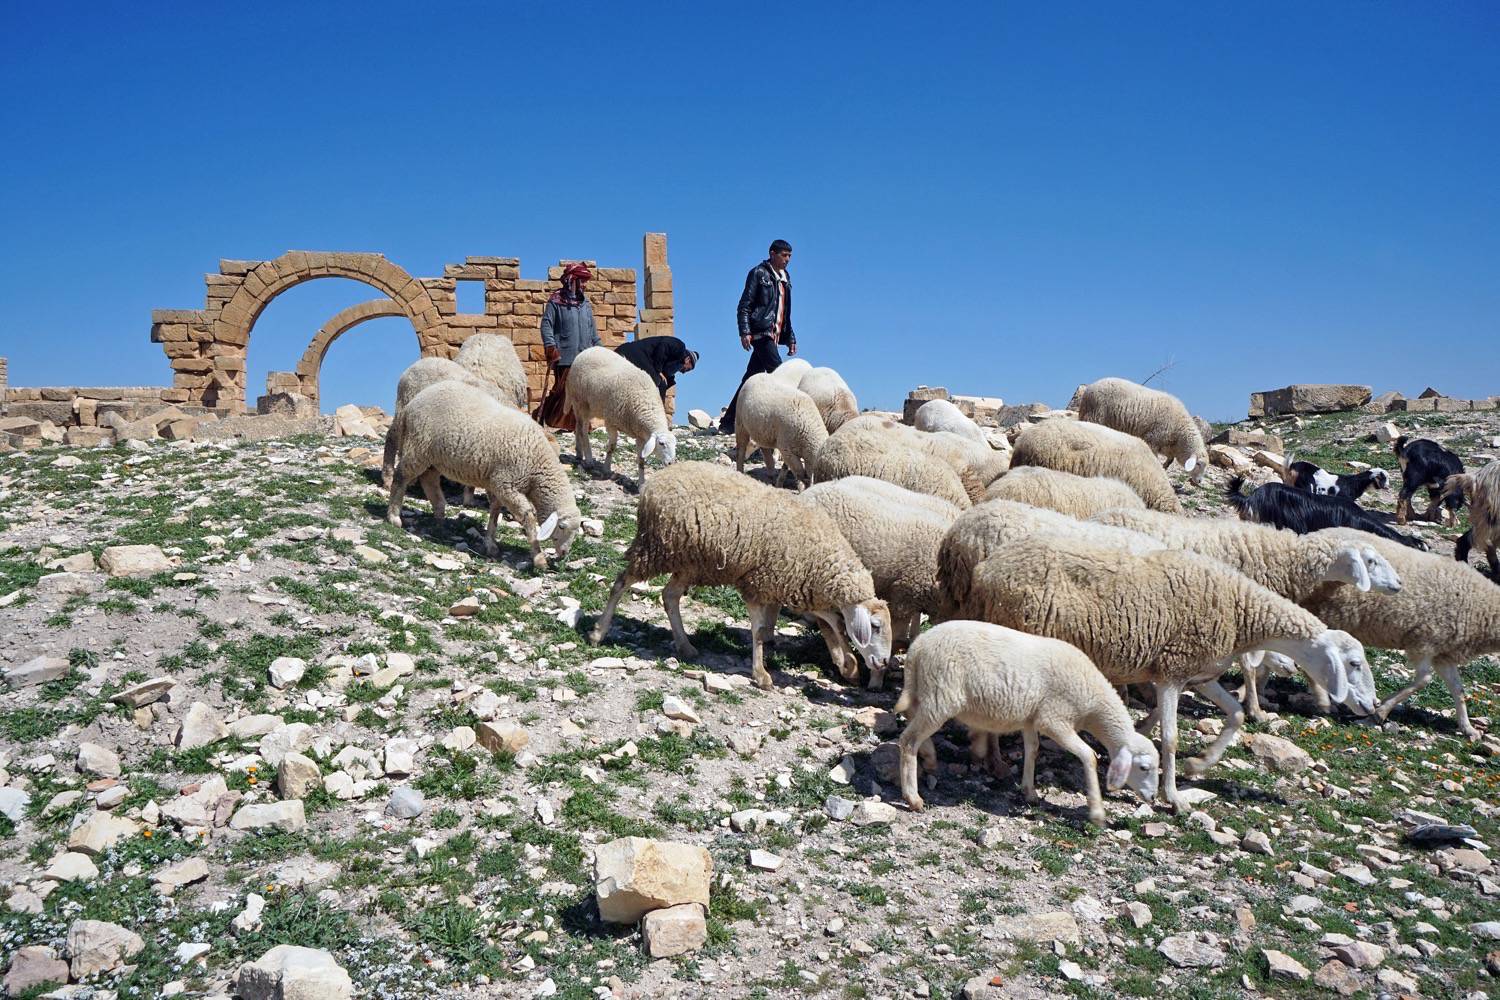 Shepherds, sheeps and the ruins of the "building with troughs"